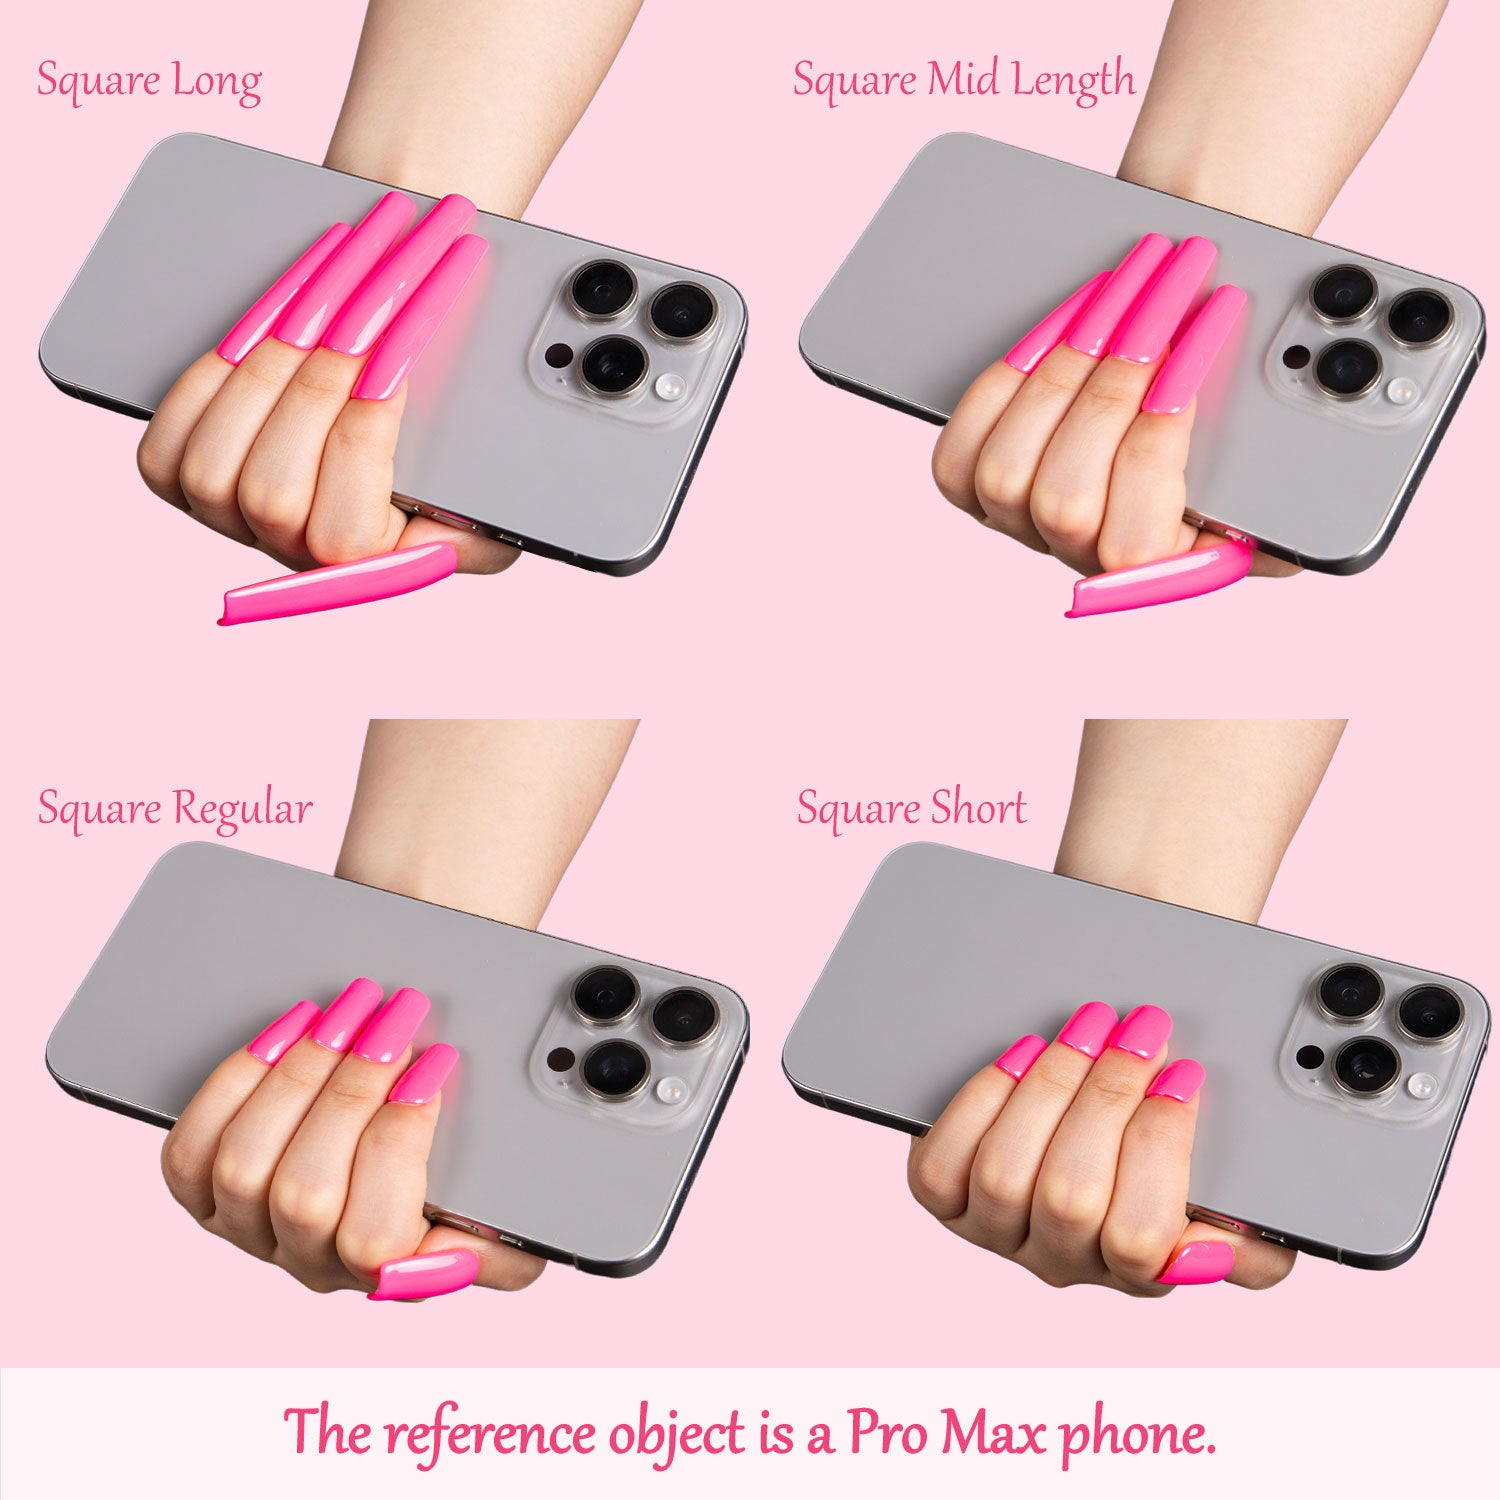 Four lengths of pink square press-on nails shown holding a Pro Max phone, labeled Square Long, Square Mid Length, Square Regular, and Square Short.